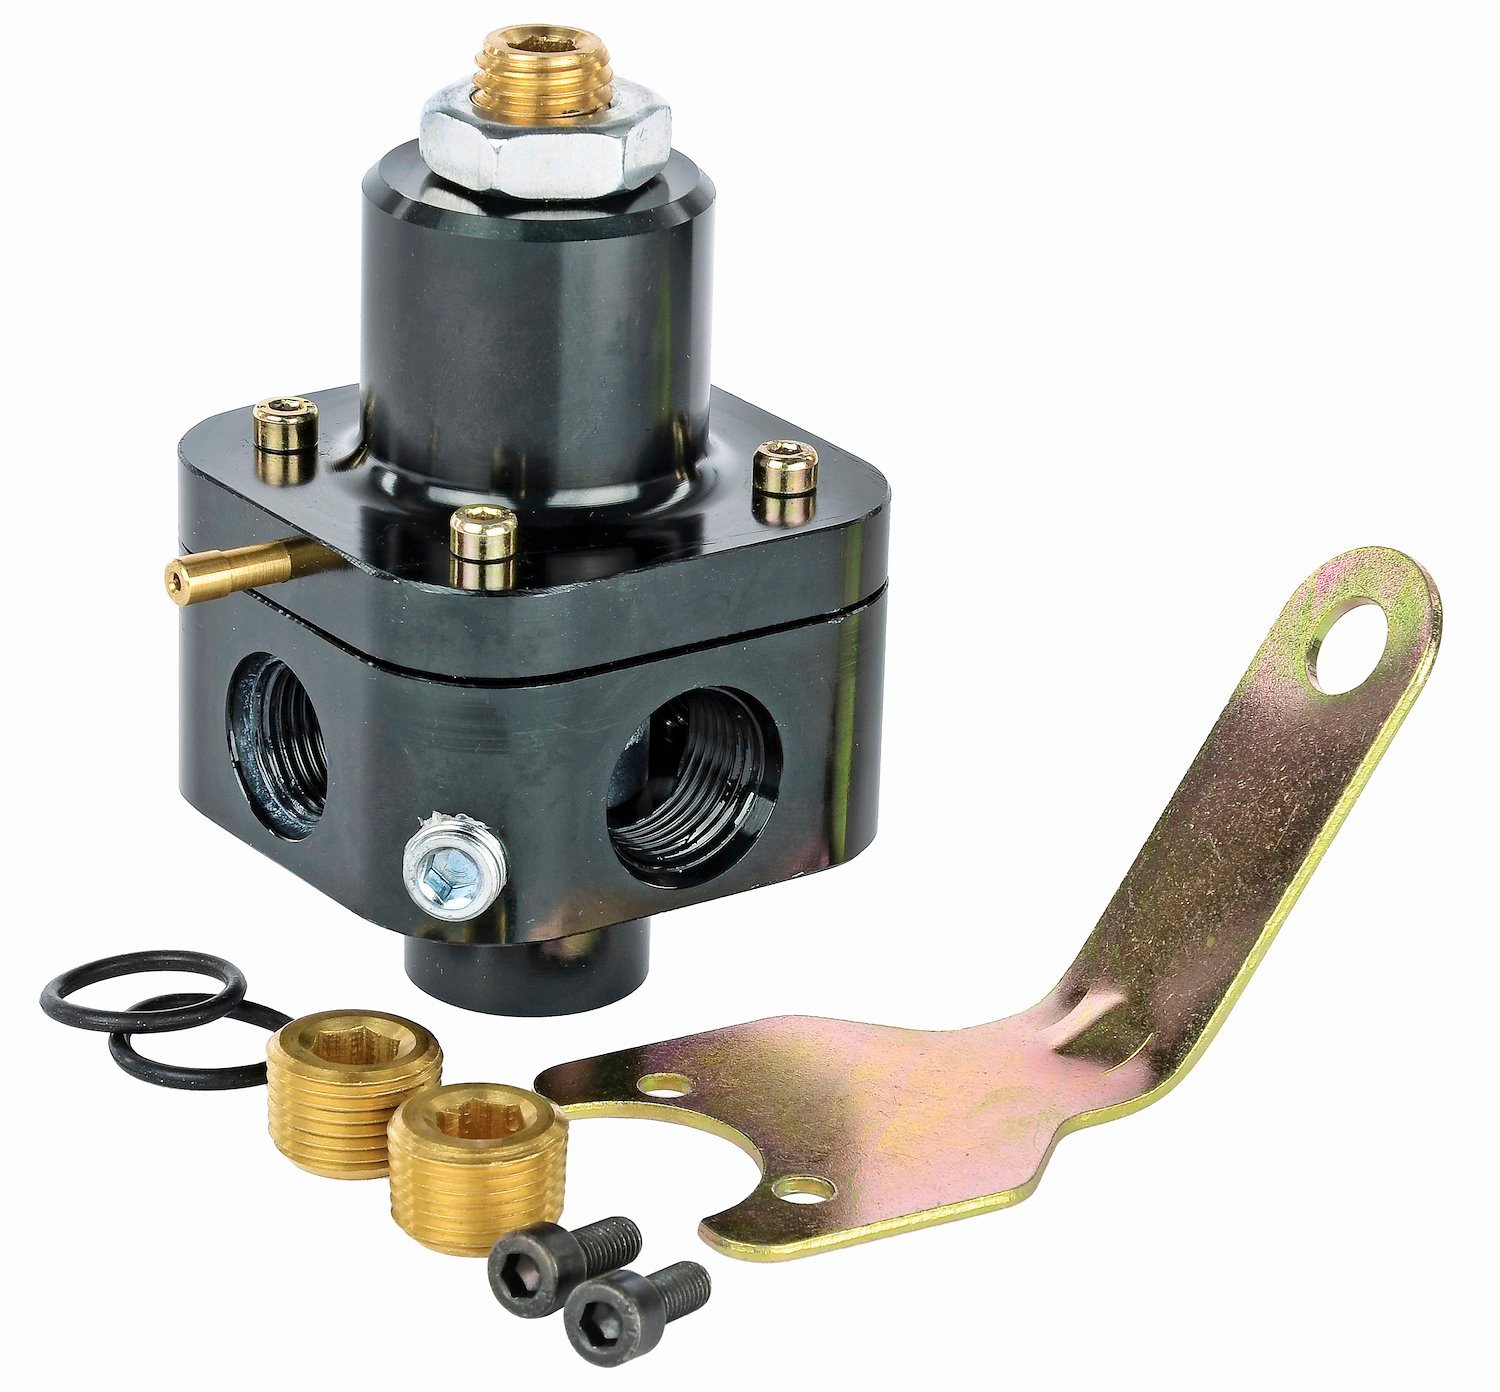 JEGS 159120: Fuel Pressure Regulator EFI Black Anodized 30-100 PSI  Ports: (1) Vacuum/Boost Reference, (2) -08AN O-Ring [Inlet/Return] (3)  3/8 in. NPT Outlets (side),  (1) 1/8 in. NPT Gauge Port Sold  Individually JEGS